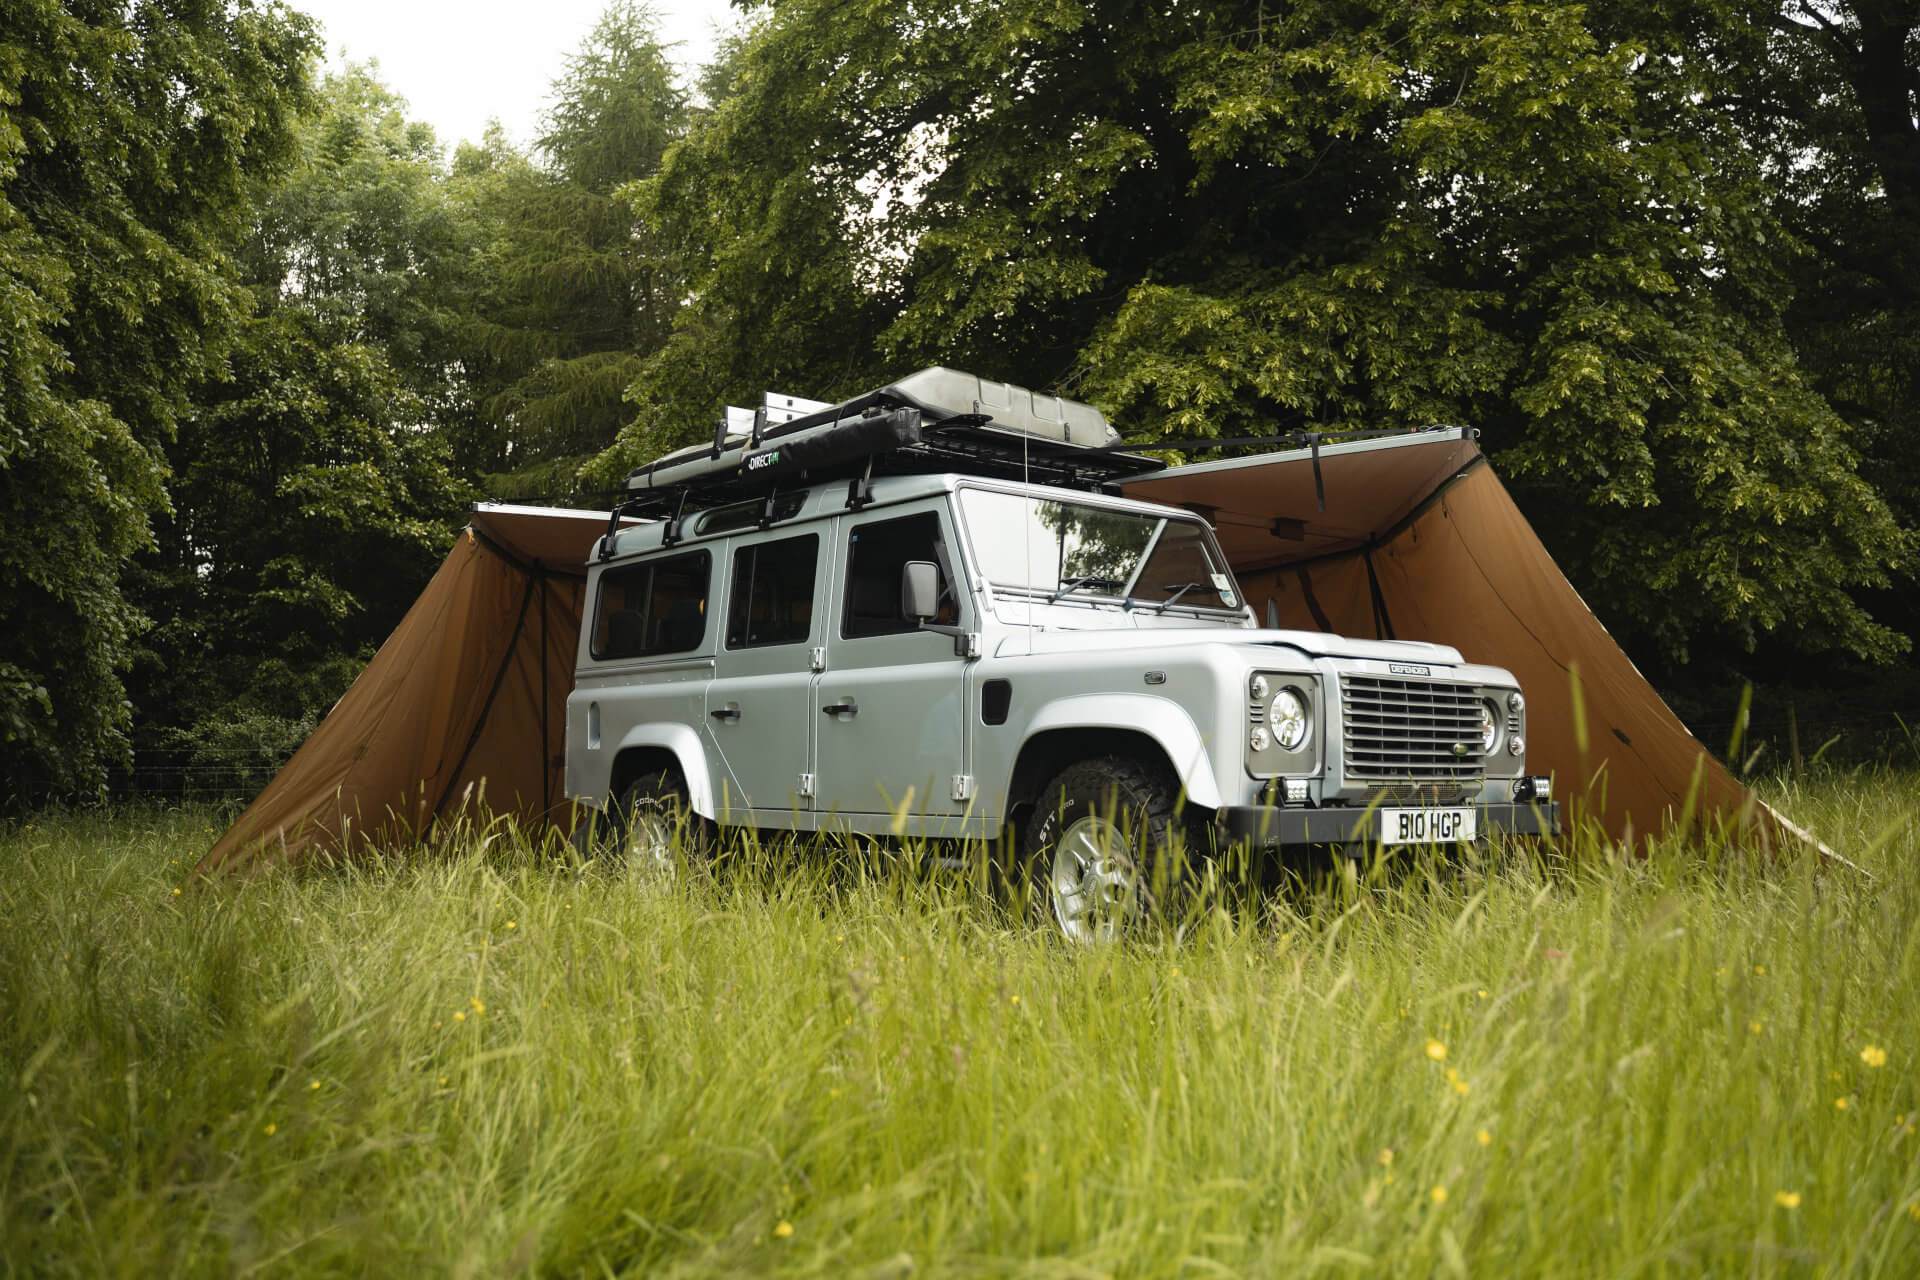 Forest Green Side Walls for Direct4x4 180 Degree Overland Expedition Awning -  - sold by Direct4x4